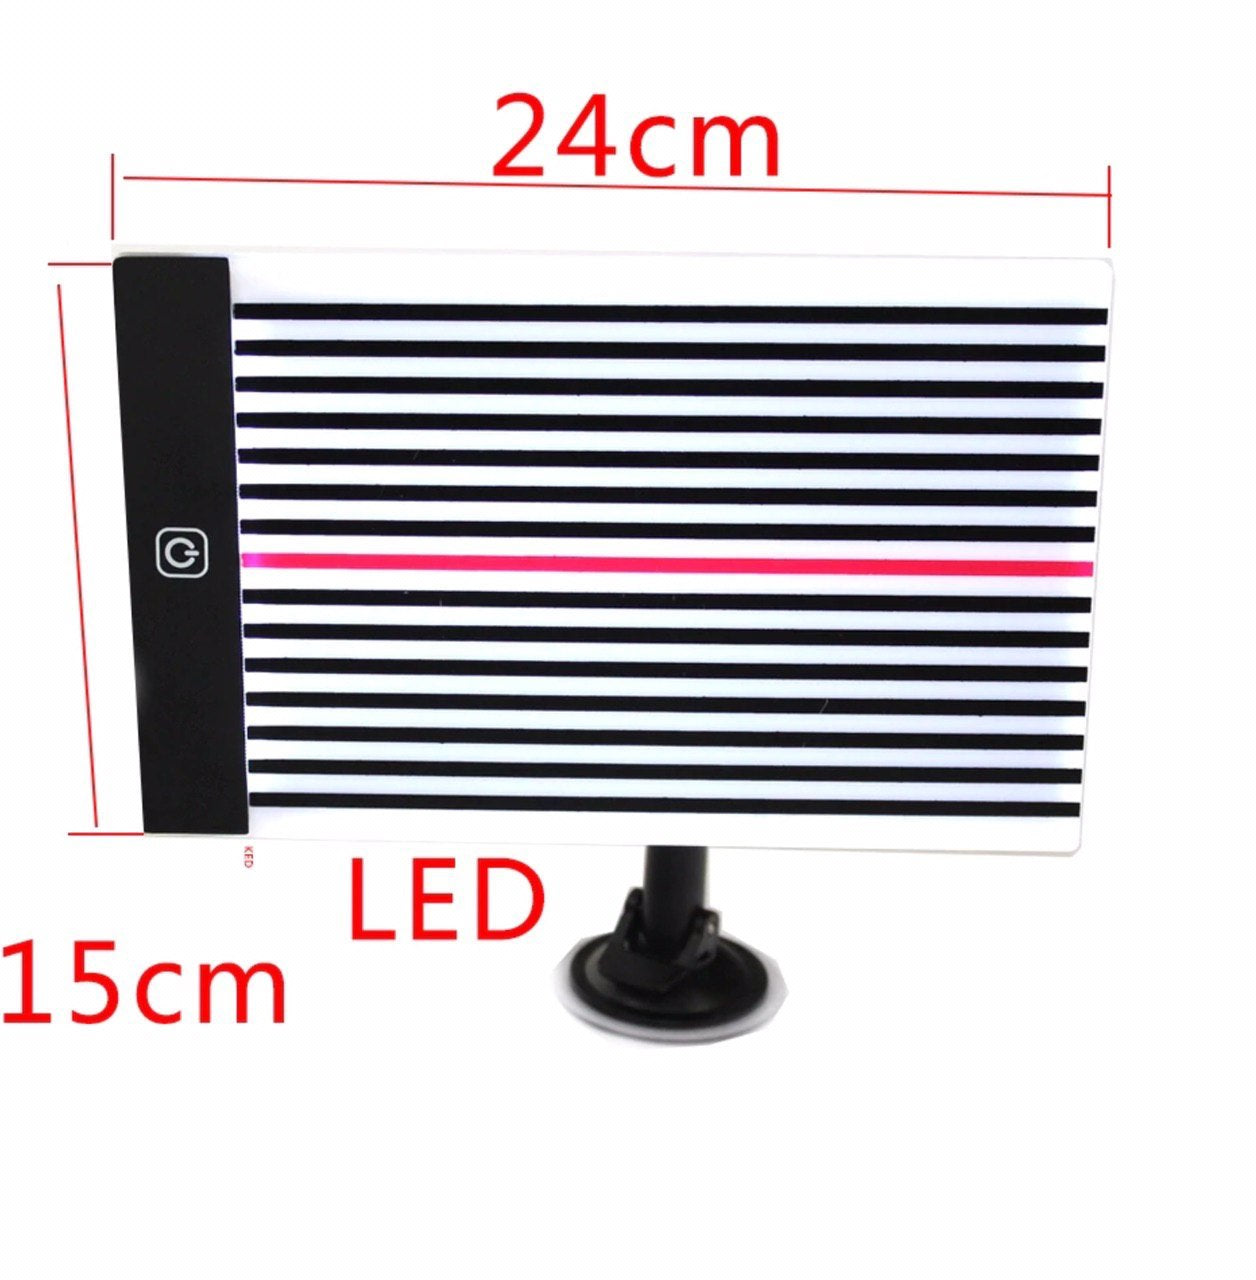 USB PDR Lamp Board Reflection Board with Adjustable Holder PDR light high quality LED lamp